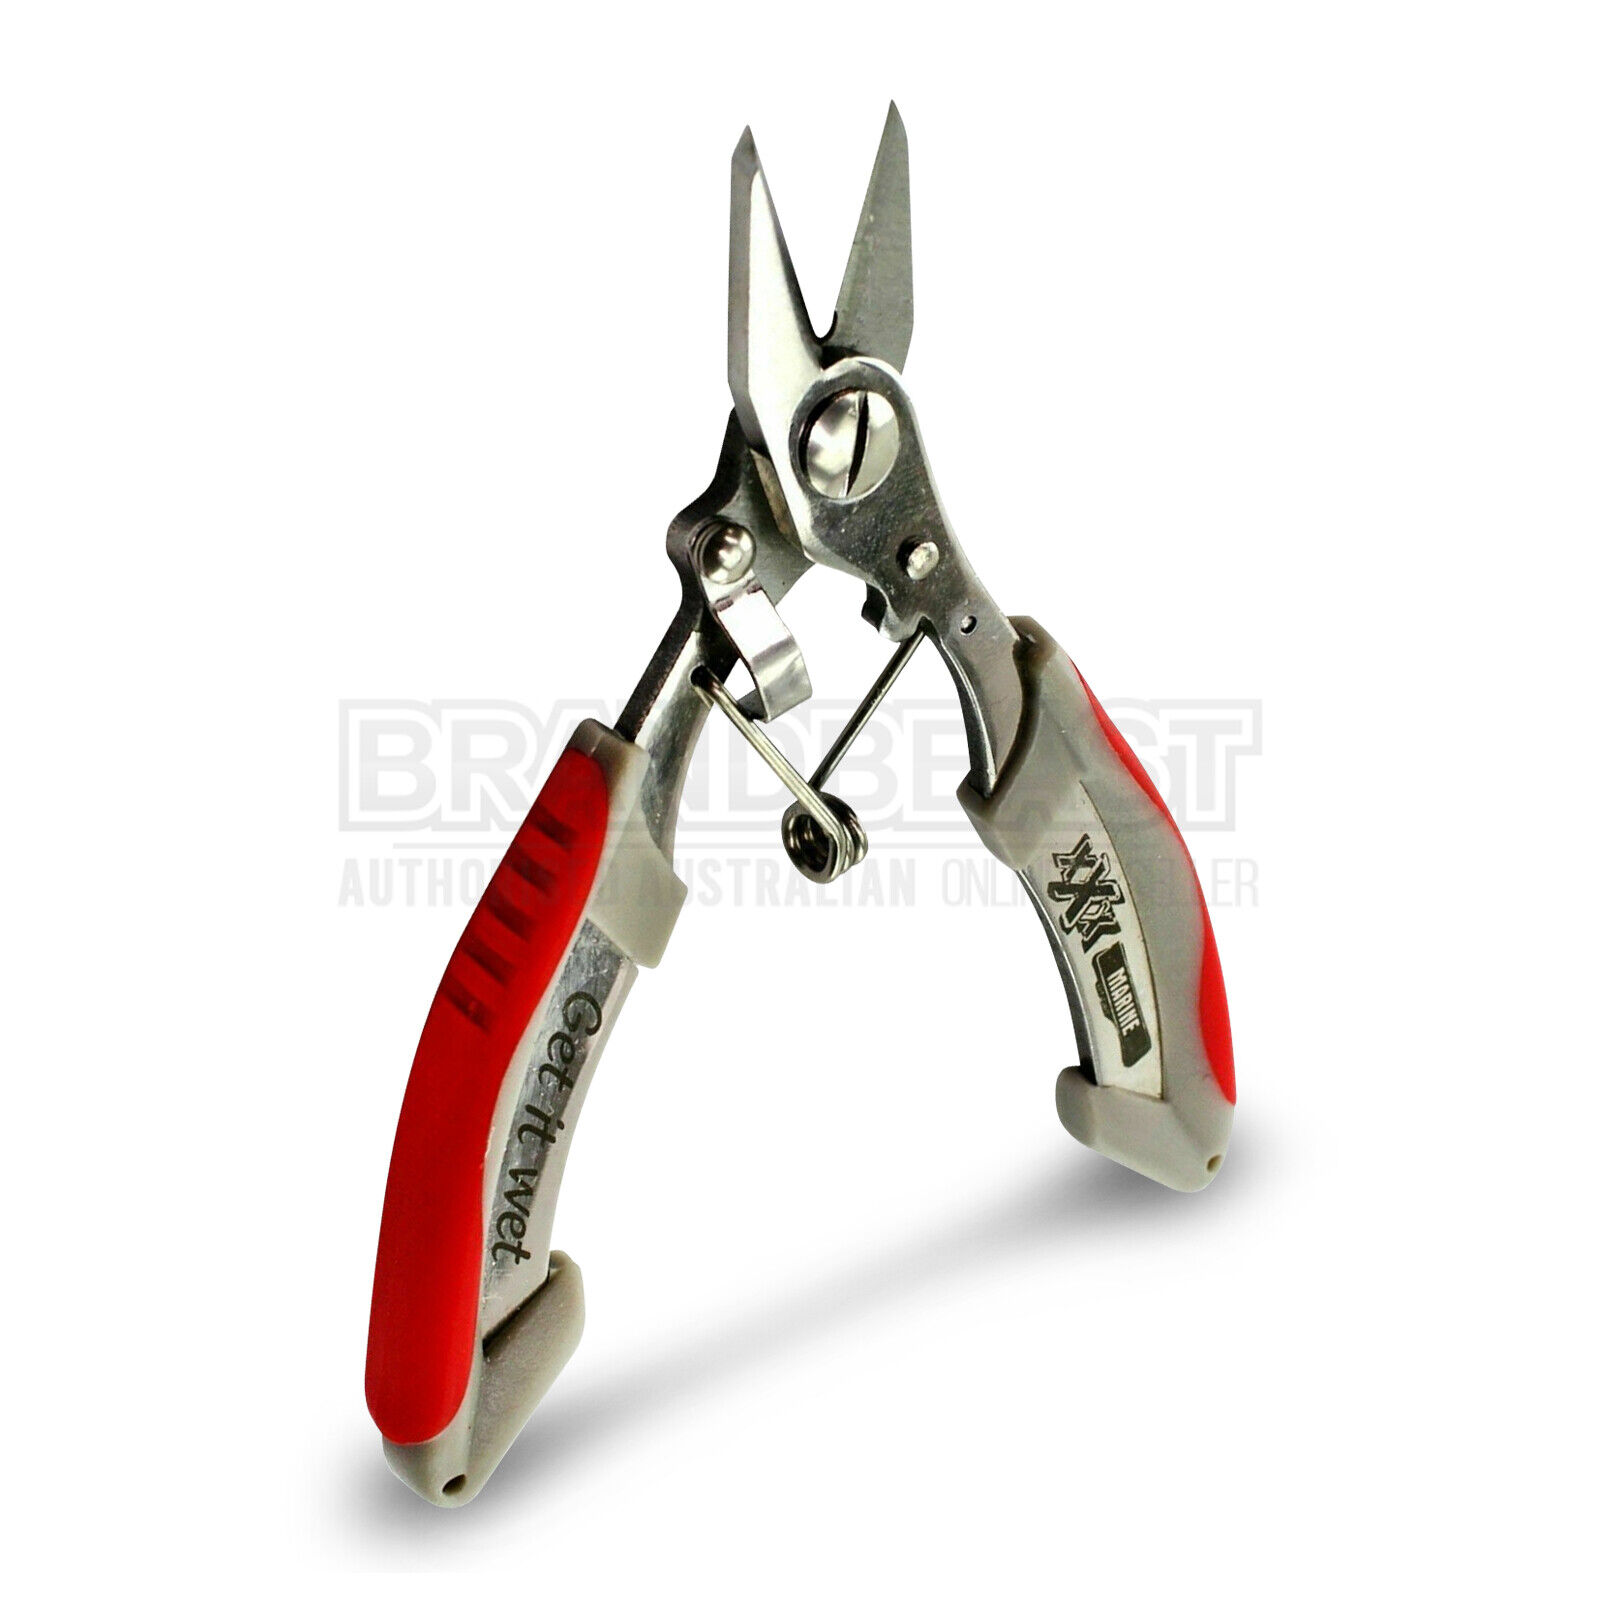 XXX Marine Stainless Steel Fishing Pliers - Long Nose - Online